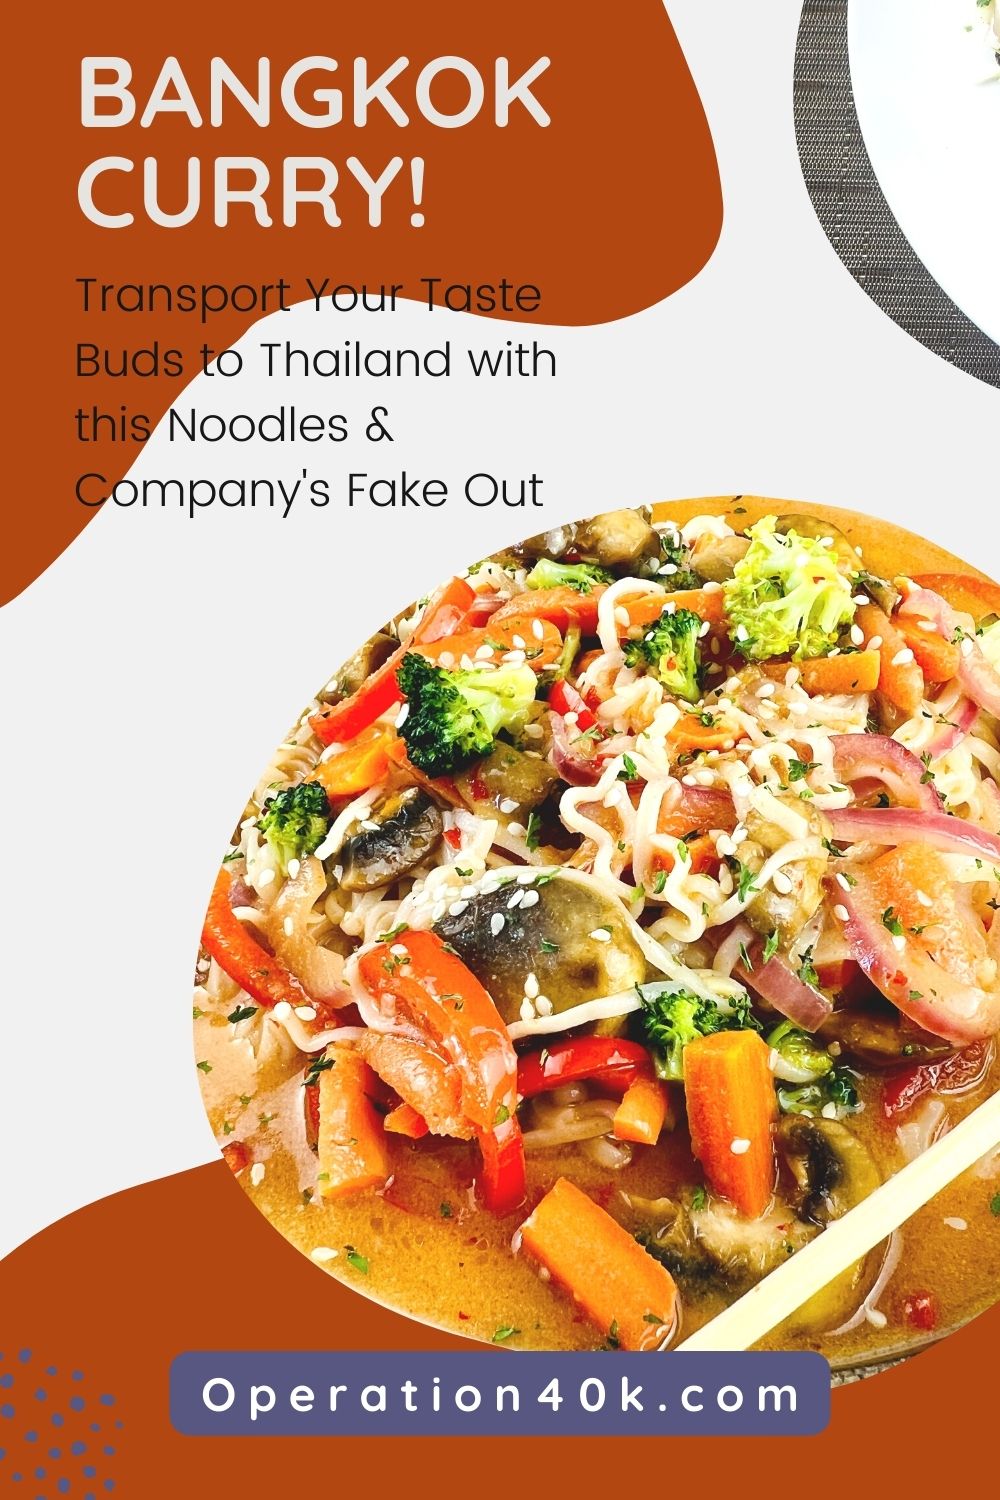 Transport Your Taste Buds to Thailand with Noodles & Company's Bangkok Curry